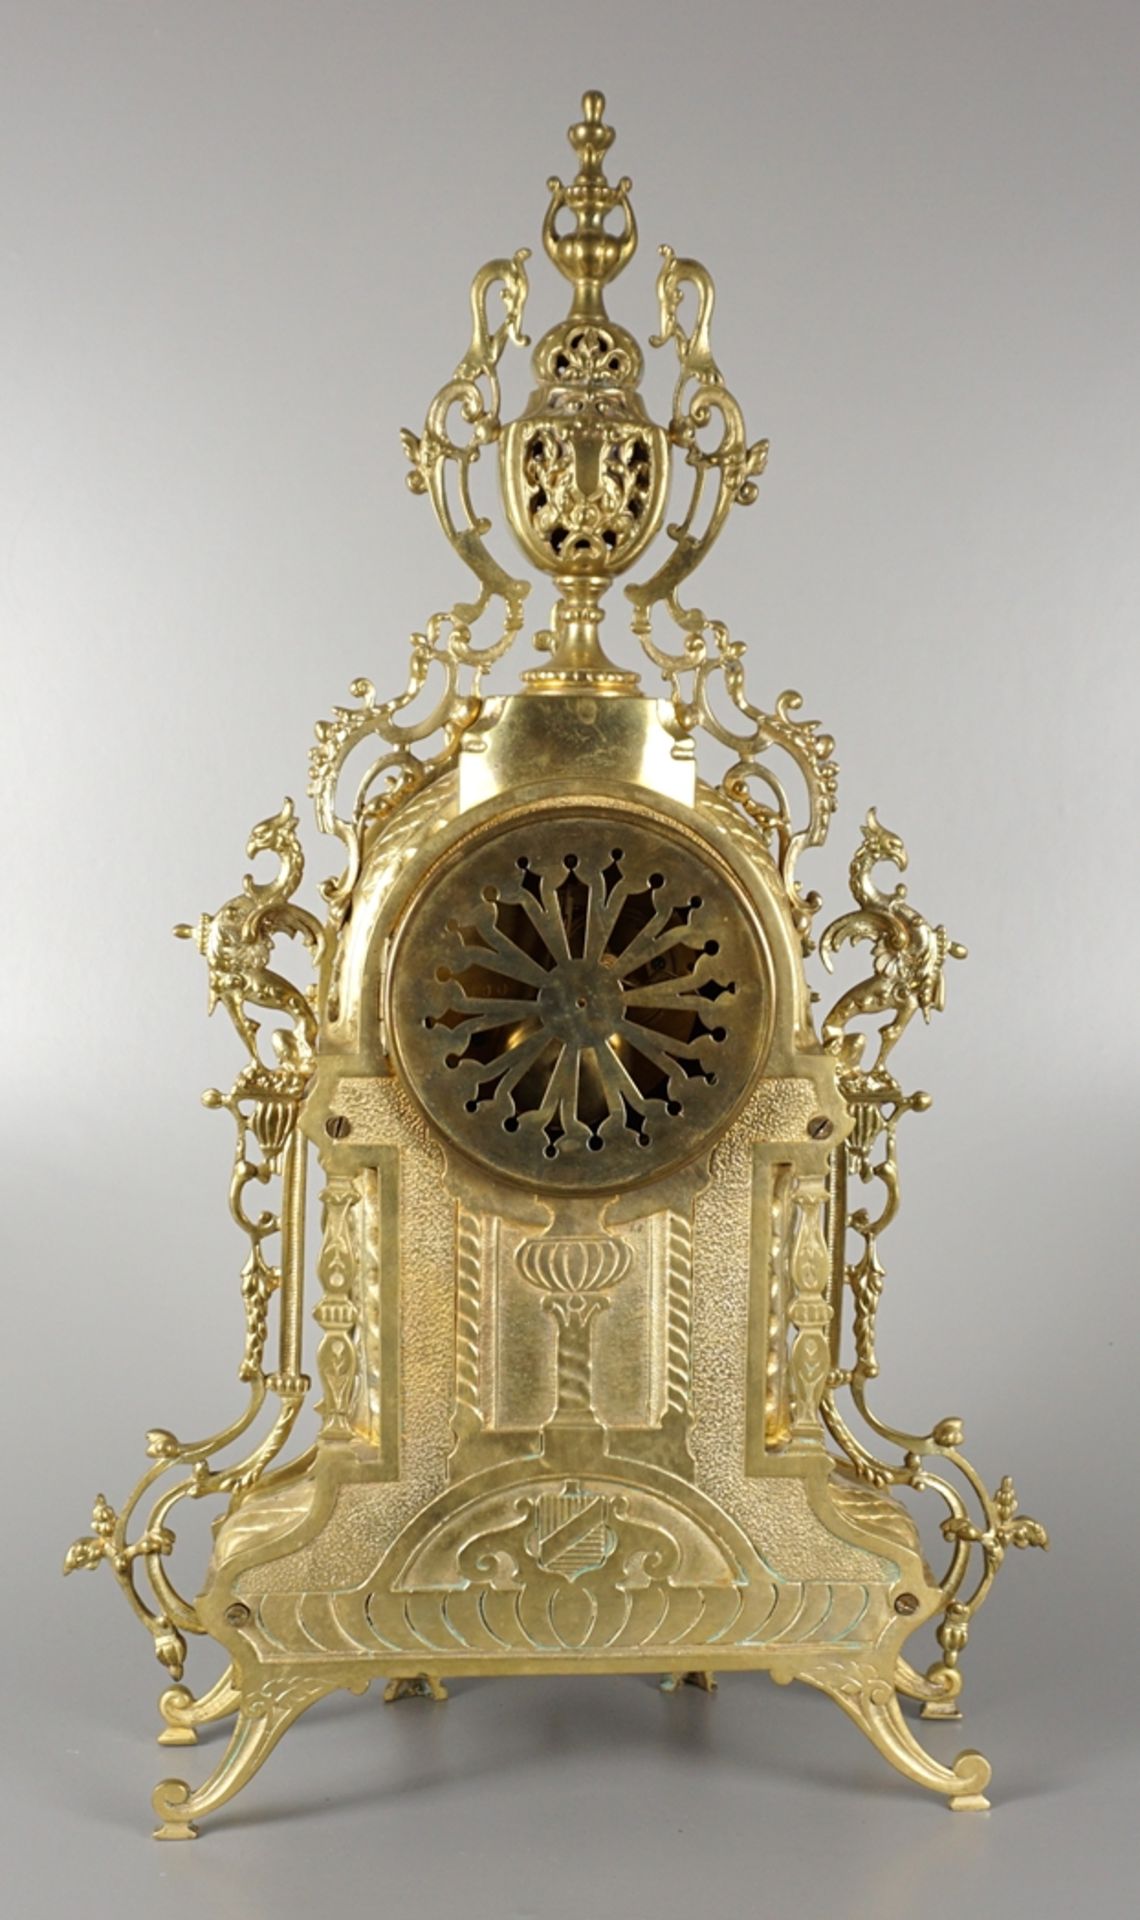 magnificent mantel clock with side plates, brass, 20th cent. - Image 3 of 5